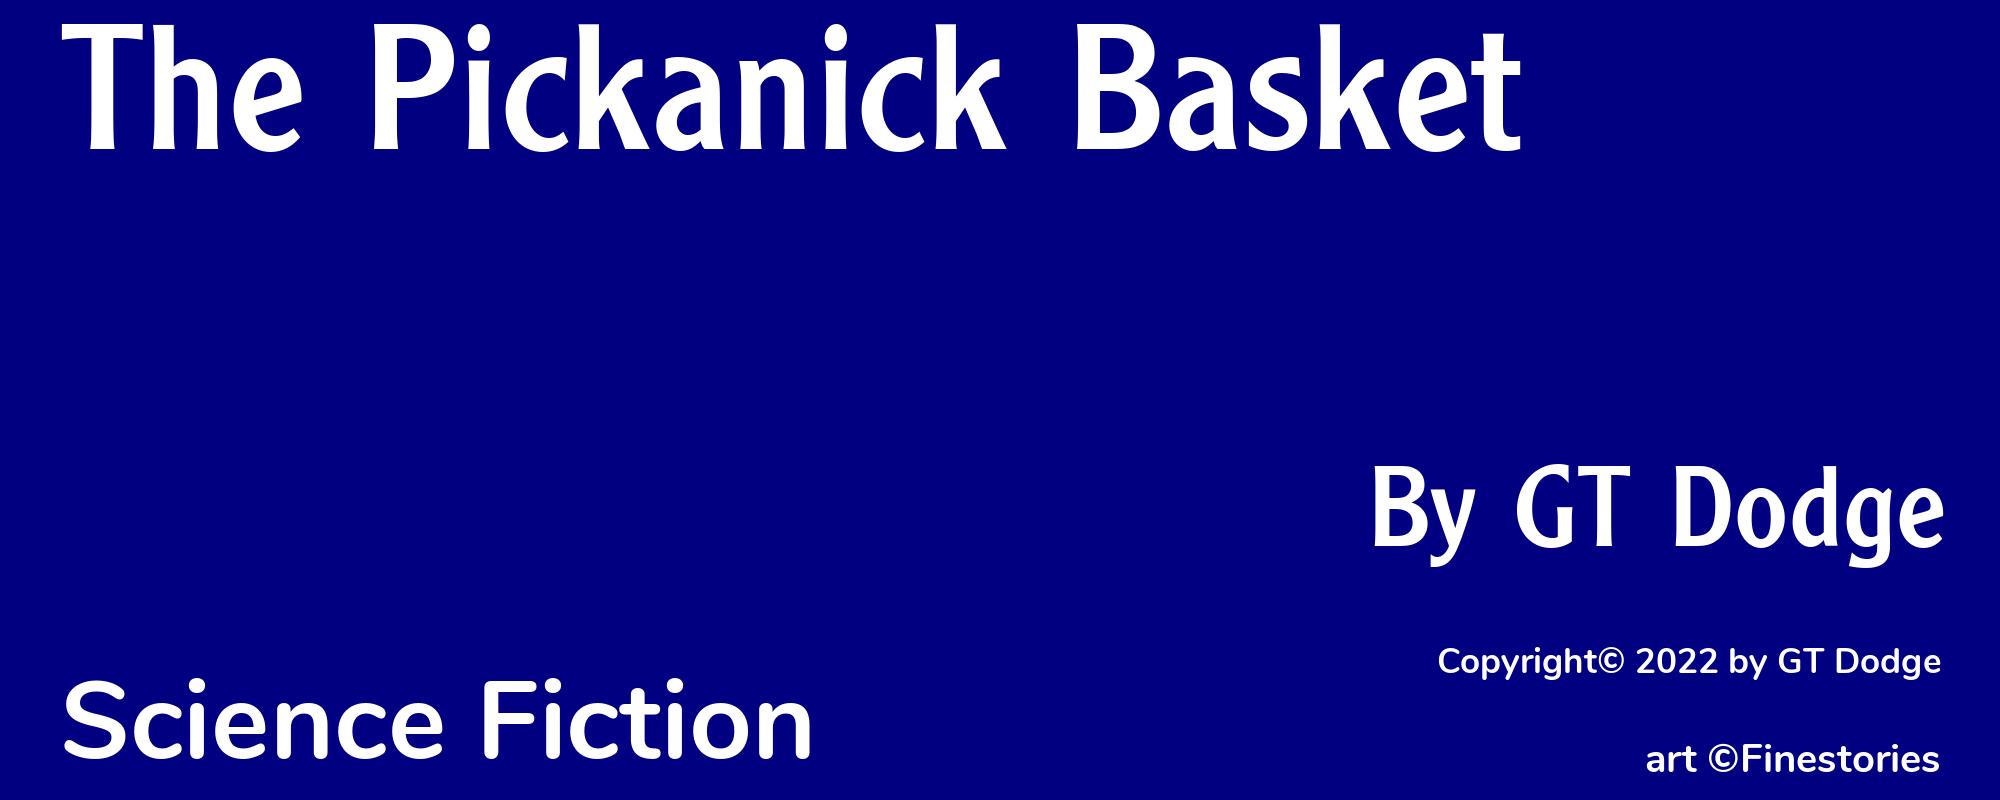 The Pickanick Basket - Cover